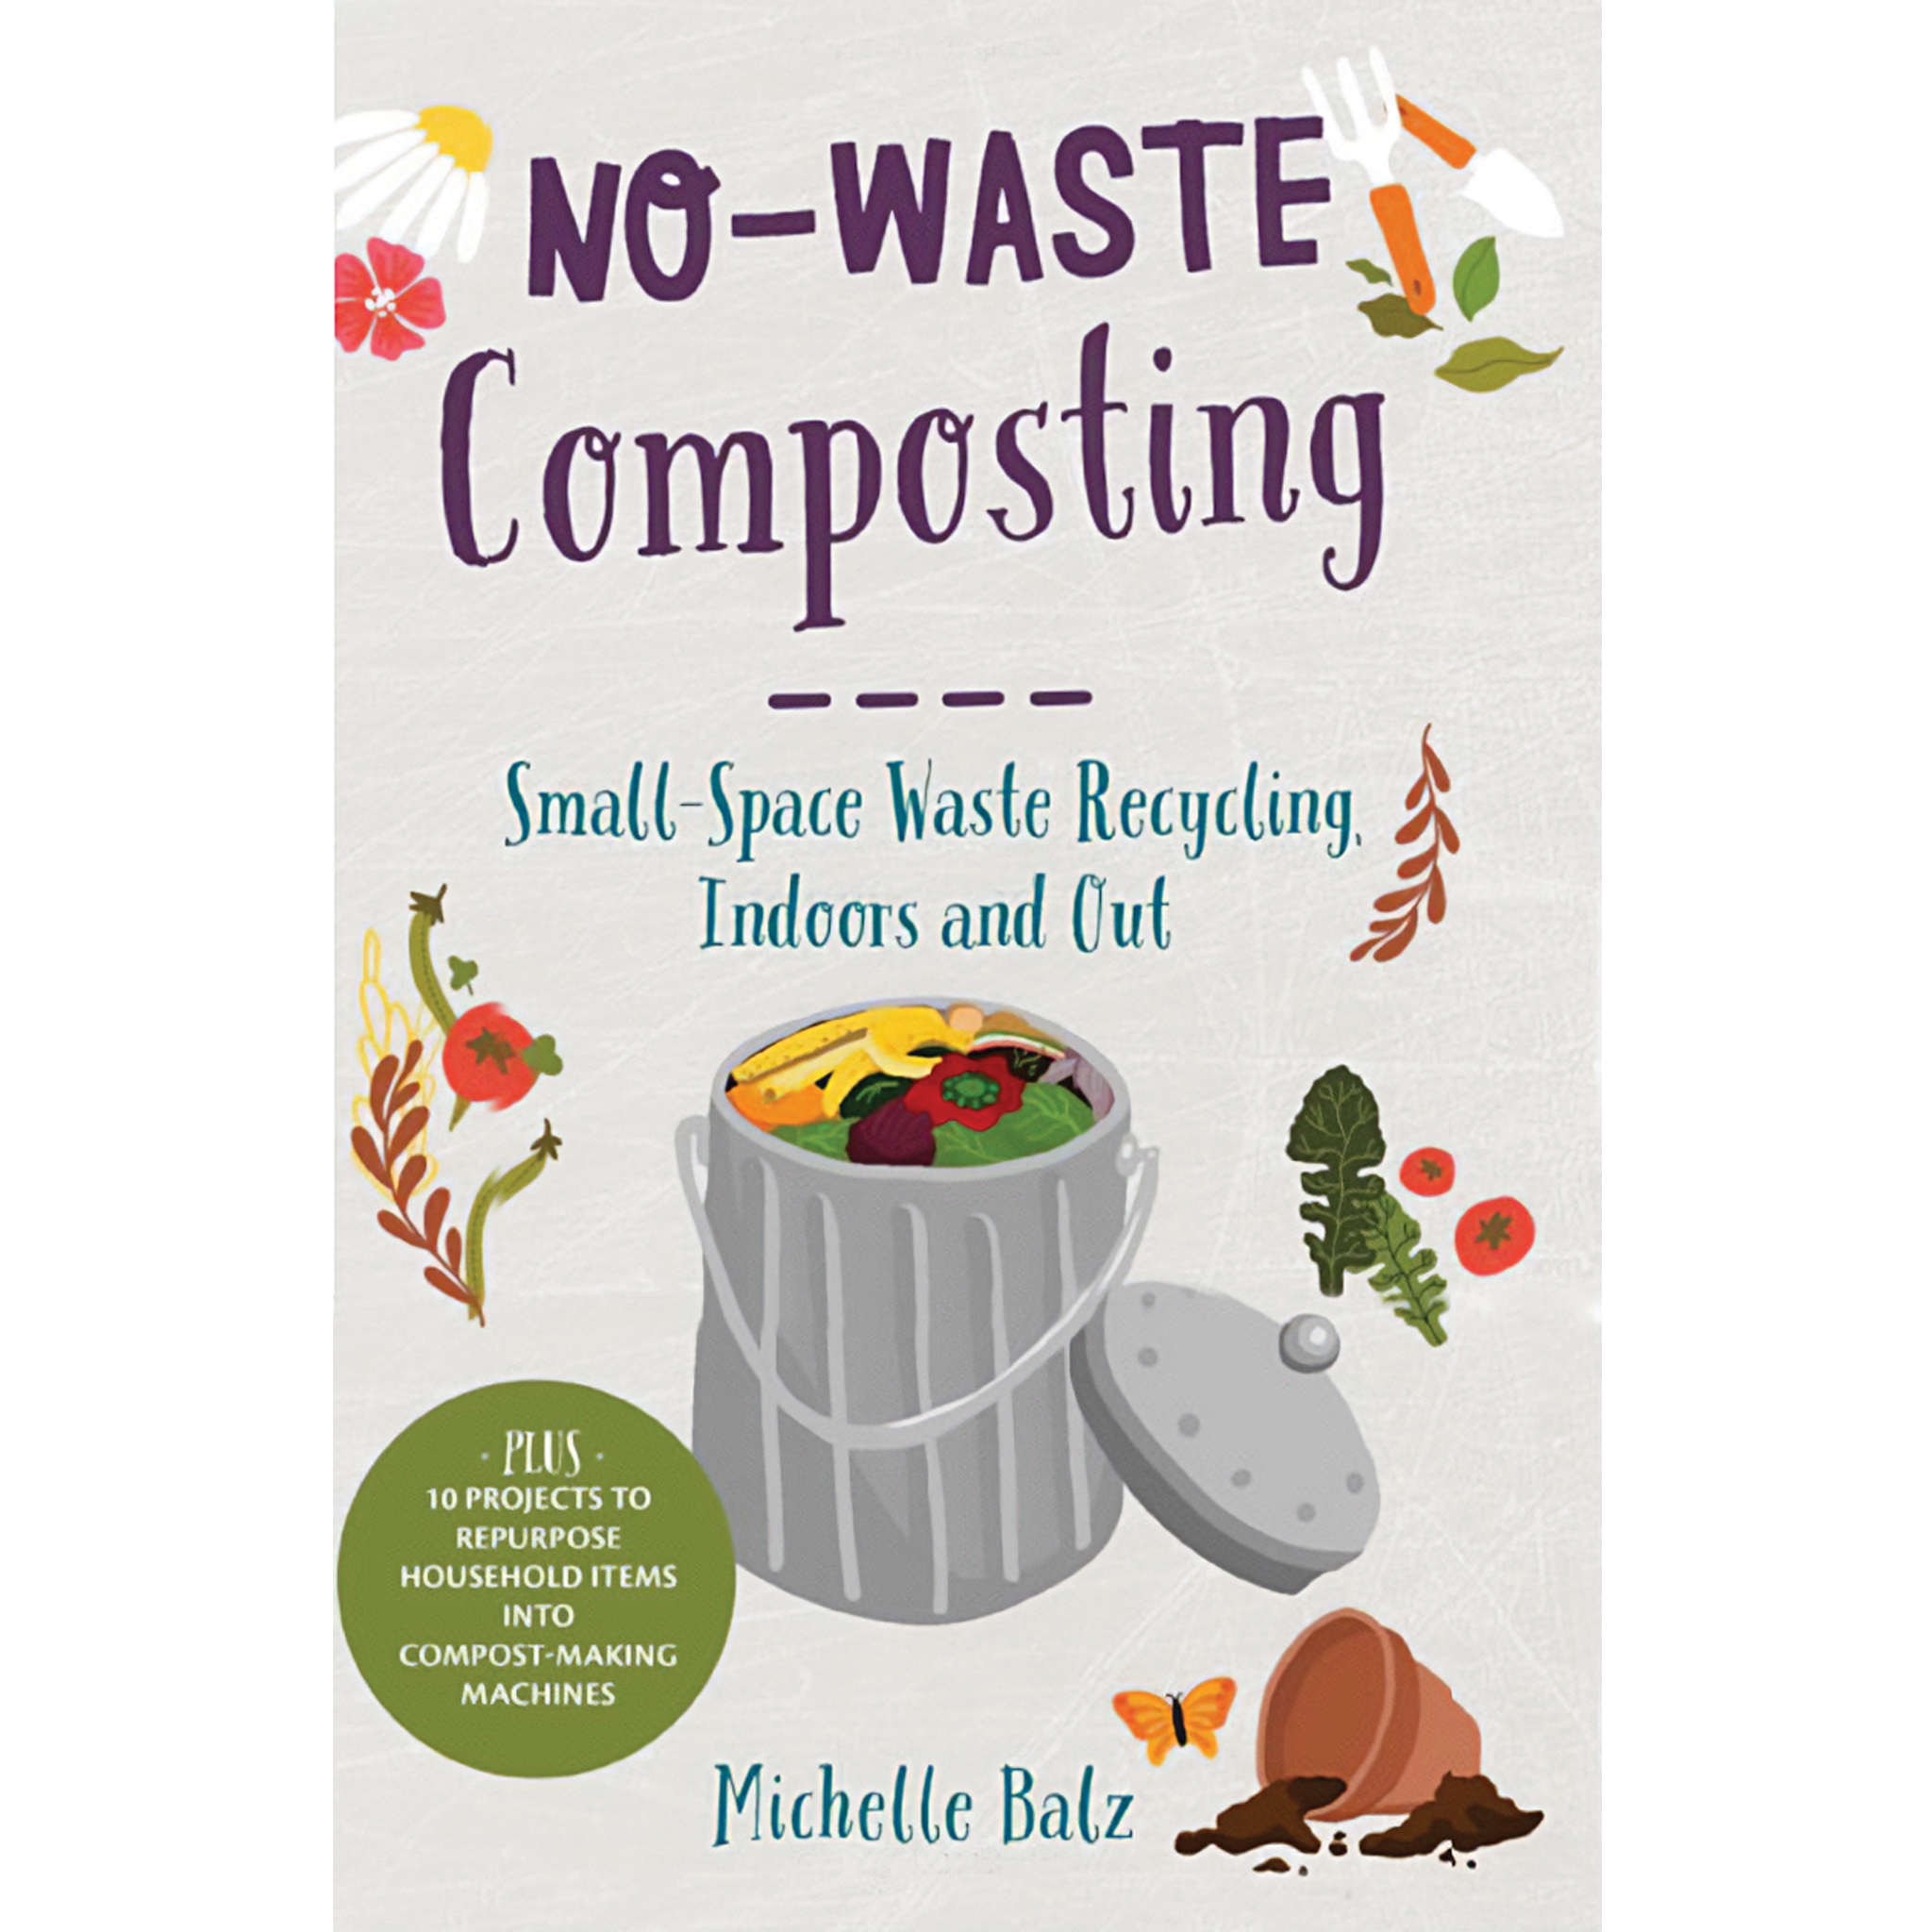 No-Waste Composting: Small-Space Waste Recycling, Indoors and Out